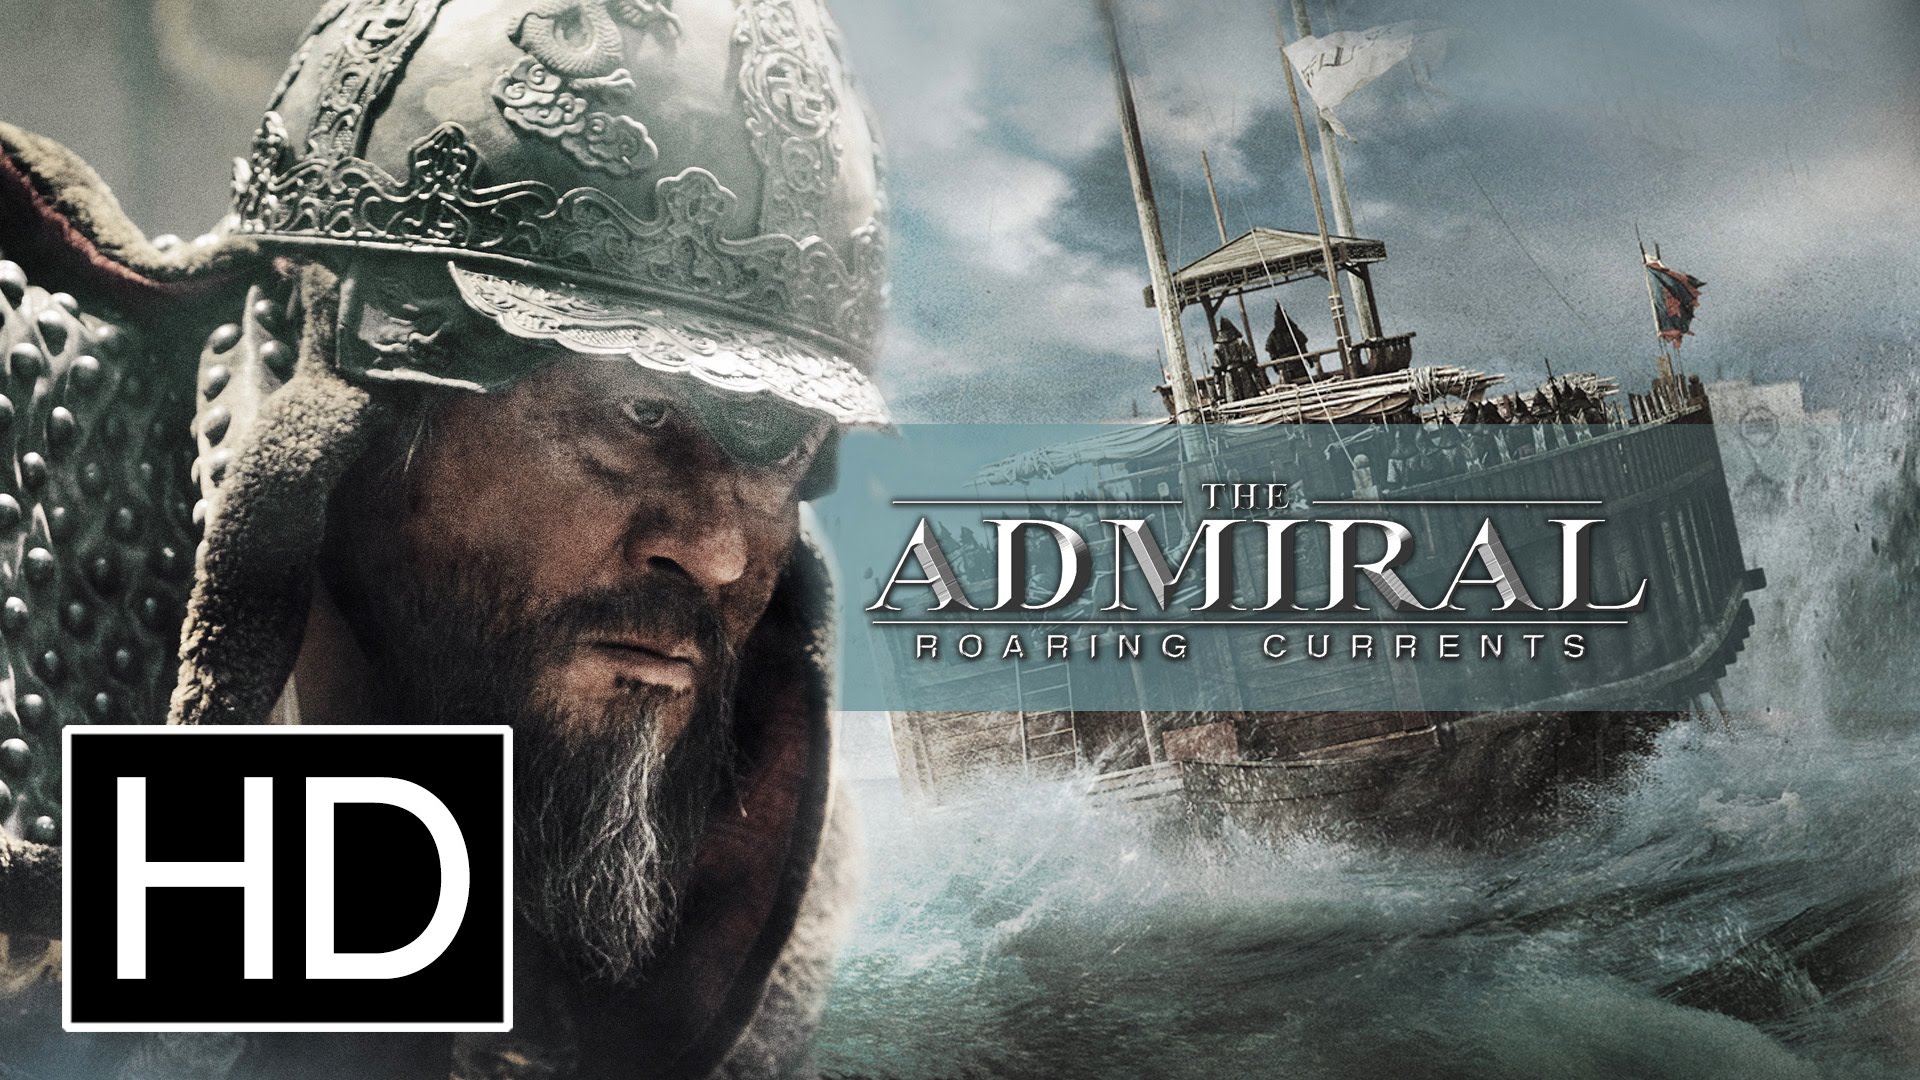 The Admiral: Roaring Currents #22